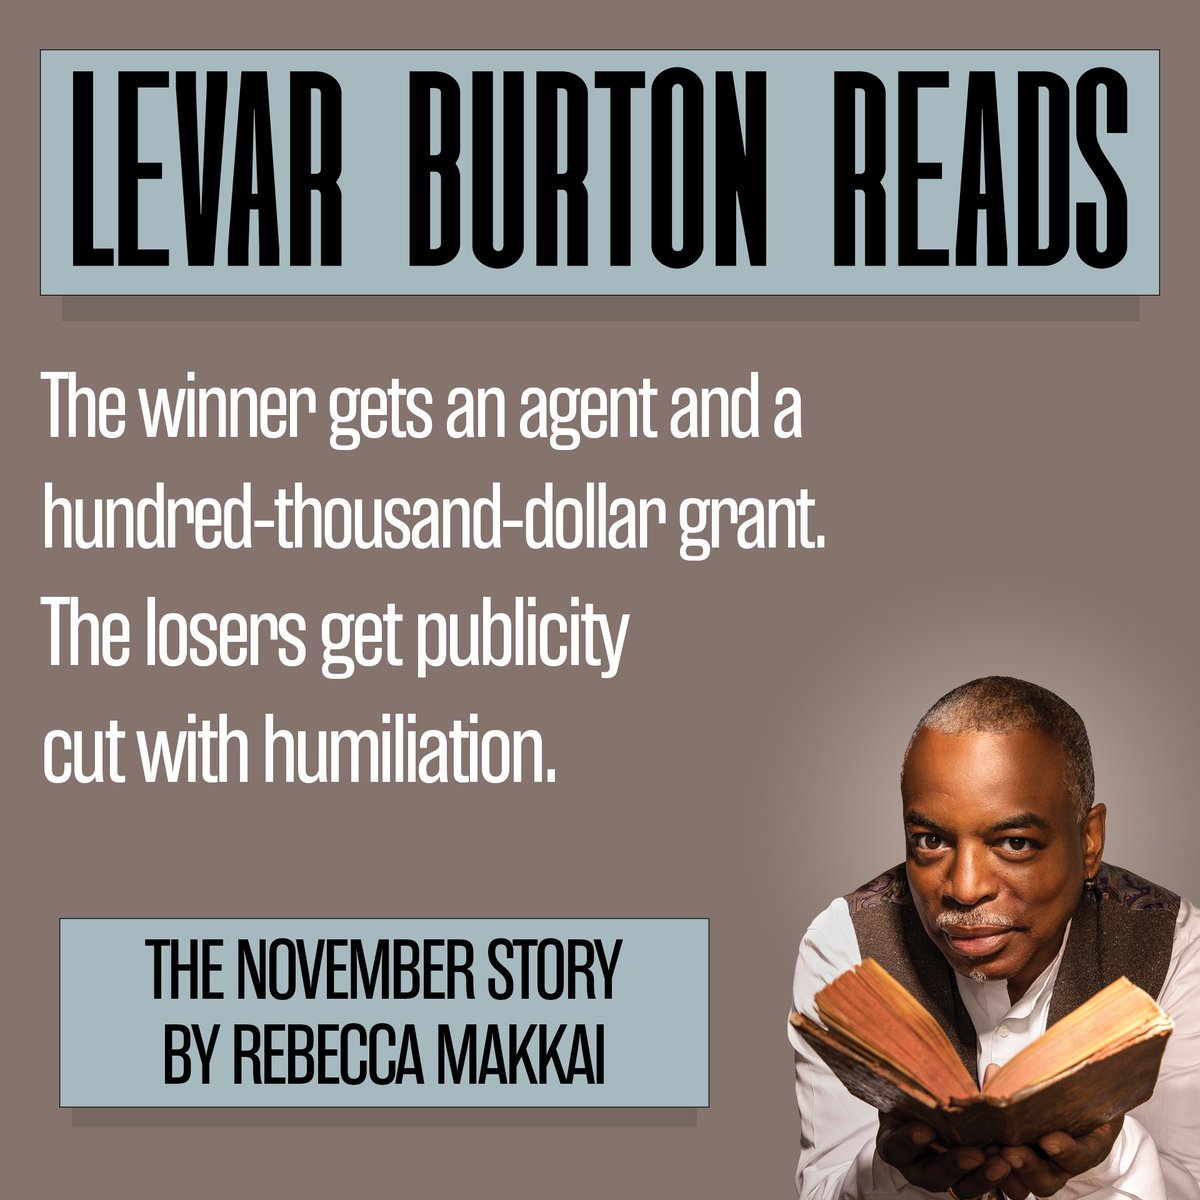 Love reality TV? Hate it? Either way, this story's for you. Check out the penultimate episode of LeVar Burton Reads, with a story by @rebeccamakkai! link.chtbl.com/TTNMrYSm